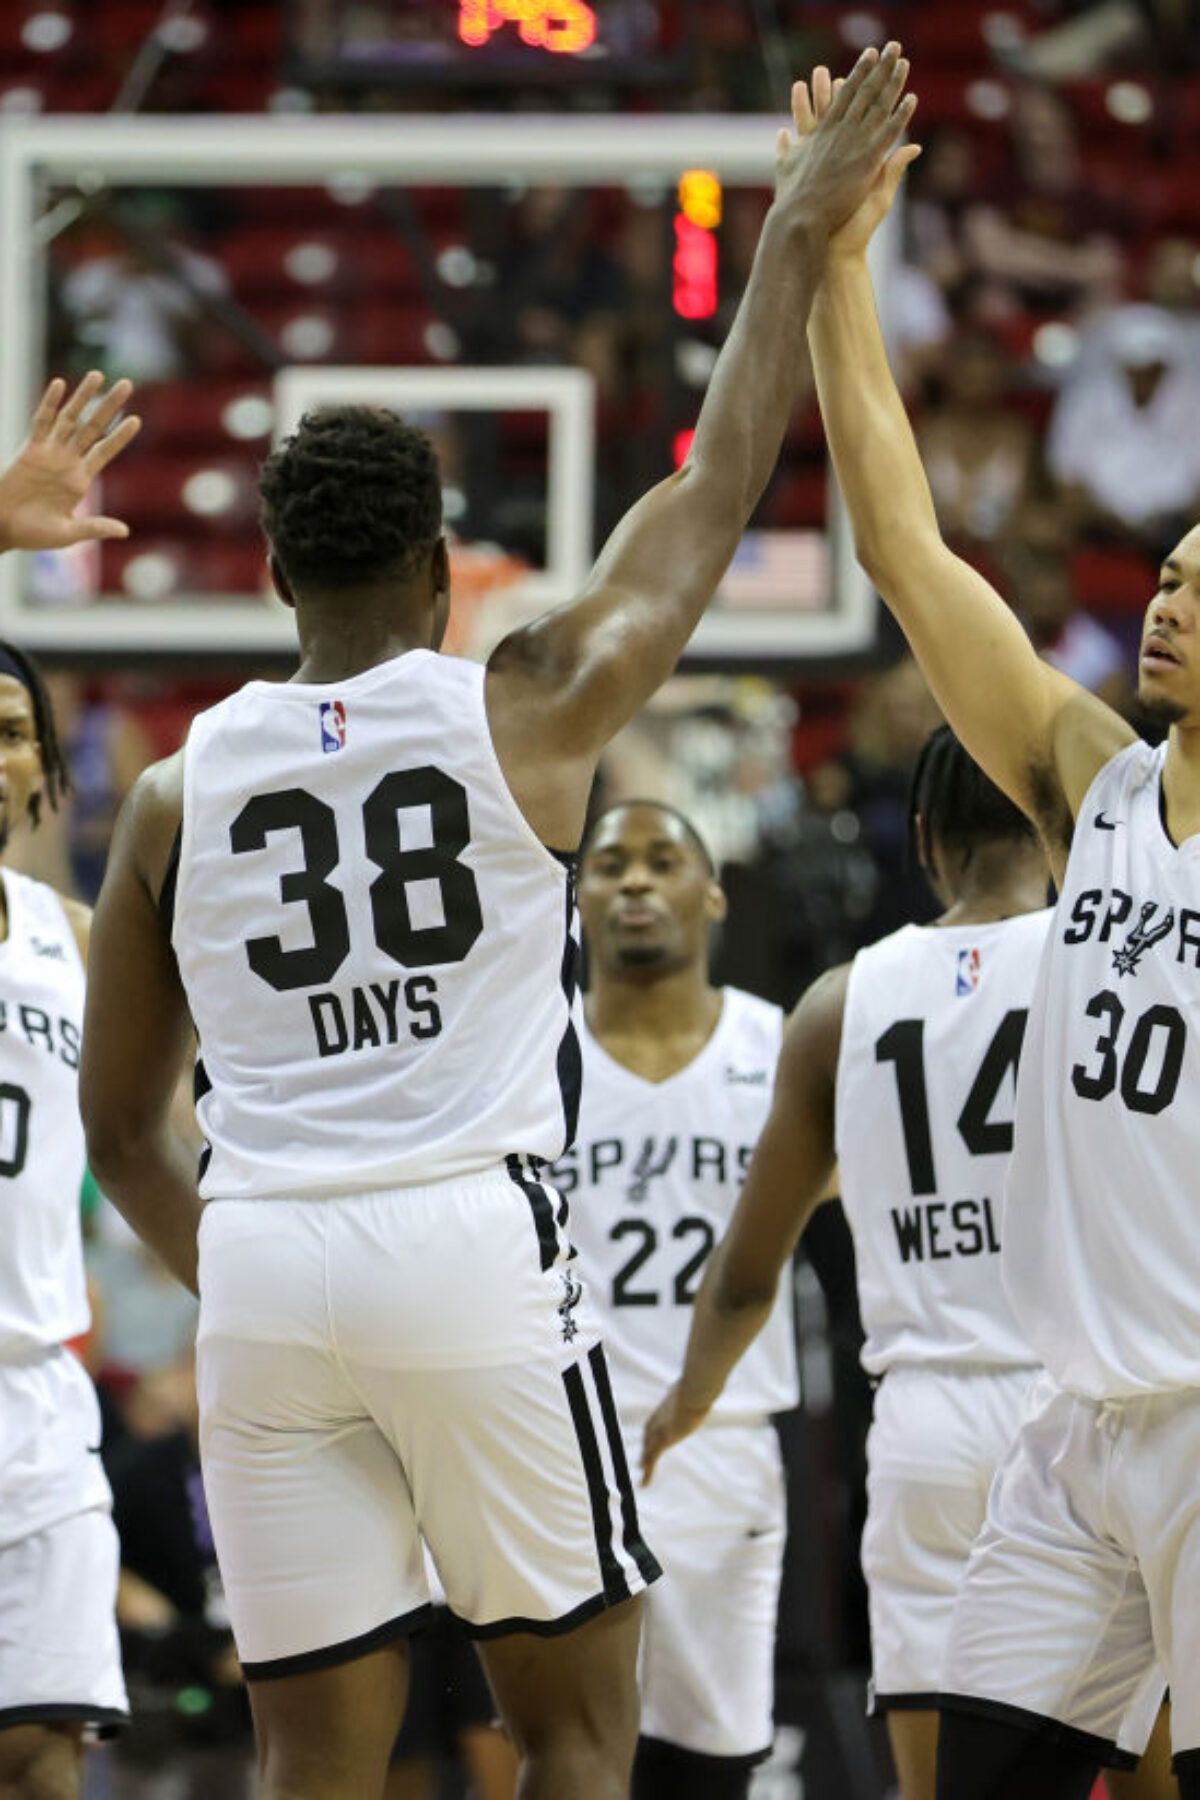 LAS VEGAS, NEVADA - JULY 11: Darius Days #38 of the San Antonio Spurs is congratulated by teammates Javin DeLaurier #40 and Jordan Hall #30 after Days hit a 3-pointer against the Houston Rockets during the 2022 NBA Summer League at the Thomas & Mack Center on July 11, 2022 in Las Vegas, Nevada. NOTE TO USER: User expressly acknowledges and agrees that, by downloading and or using this photograph, User is consenting to the terms and conditions of the Getty Images License Agreement. (Photo by Ethan Miller/Getty Images)